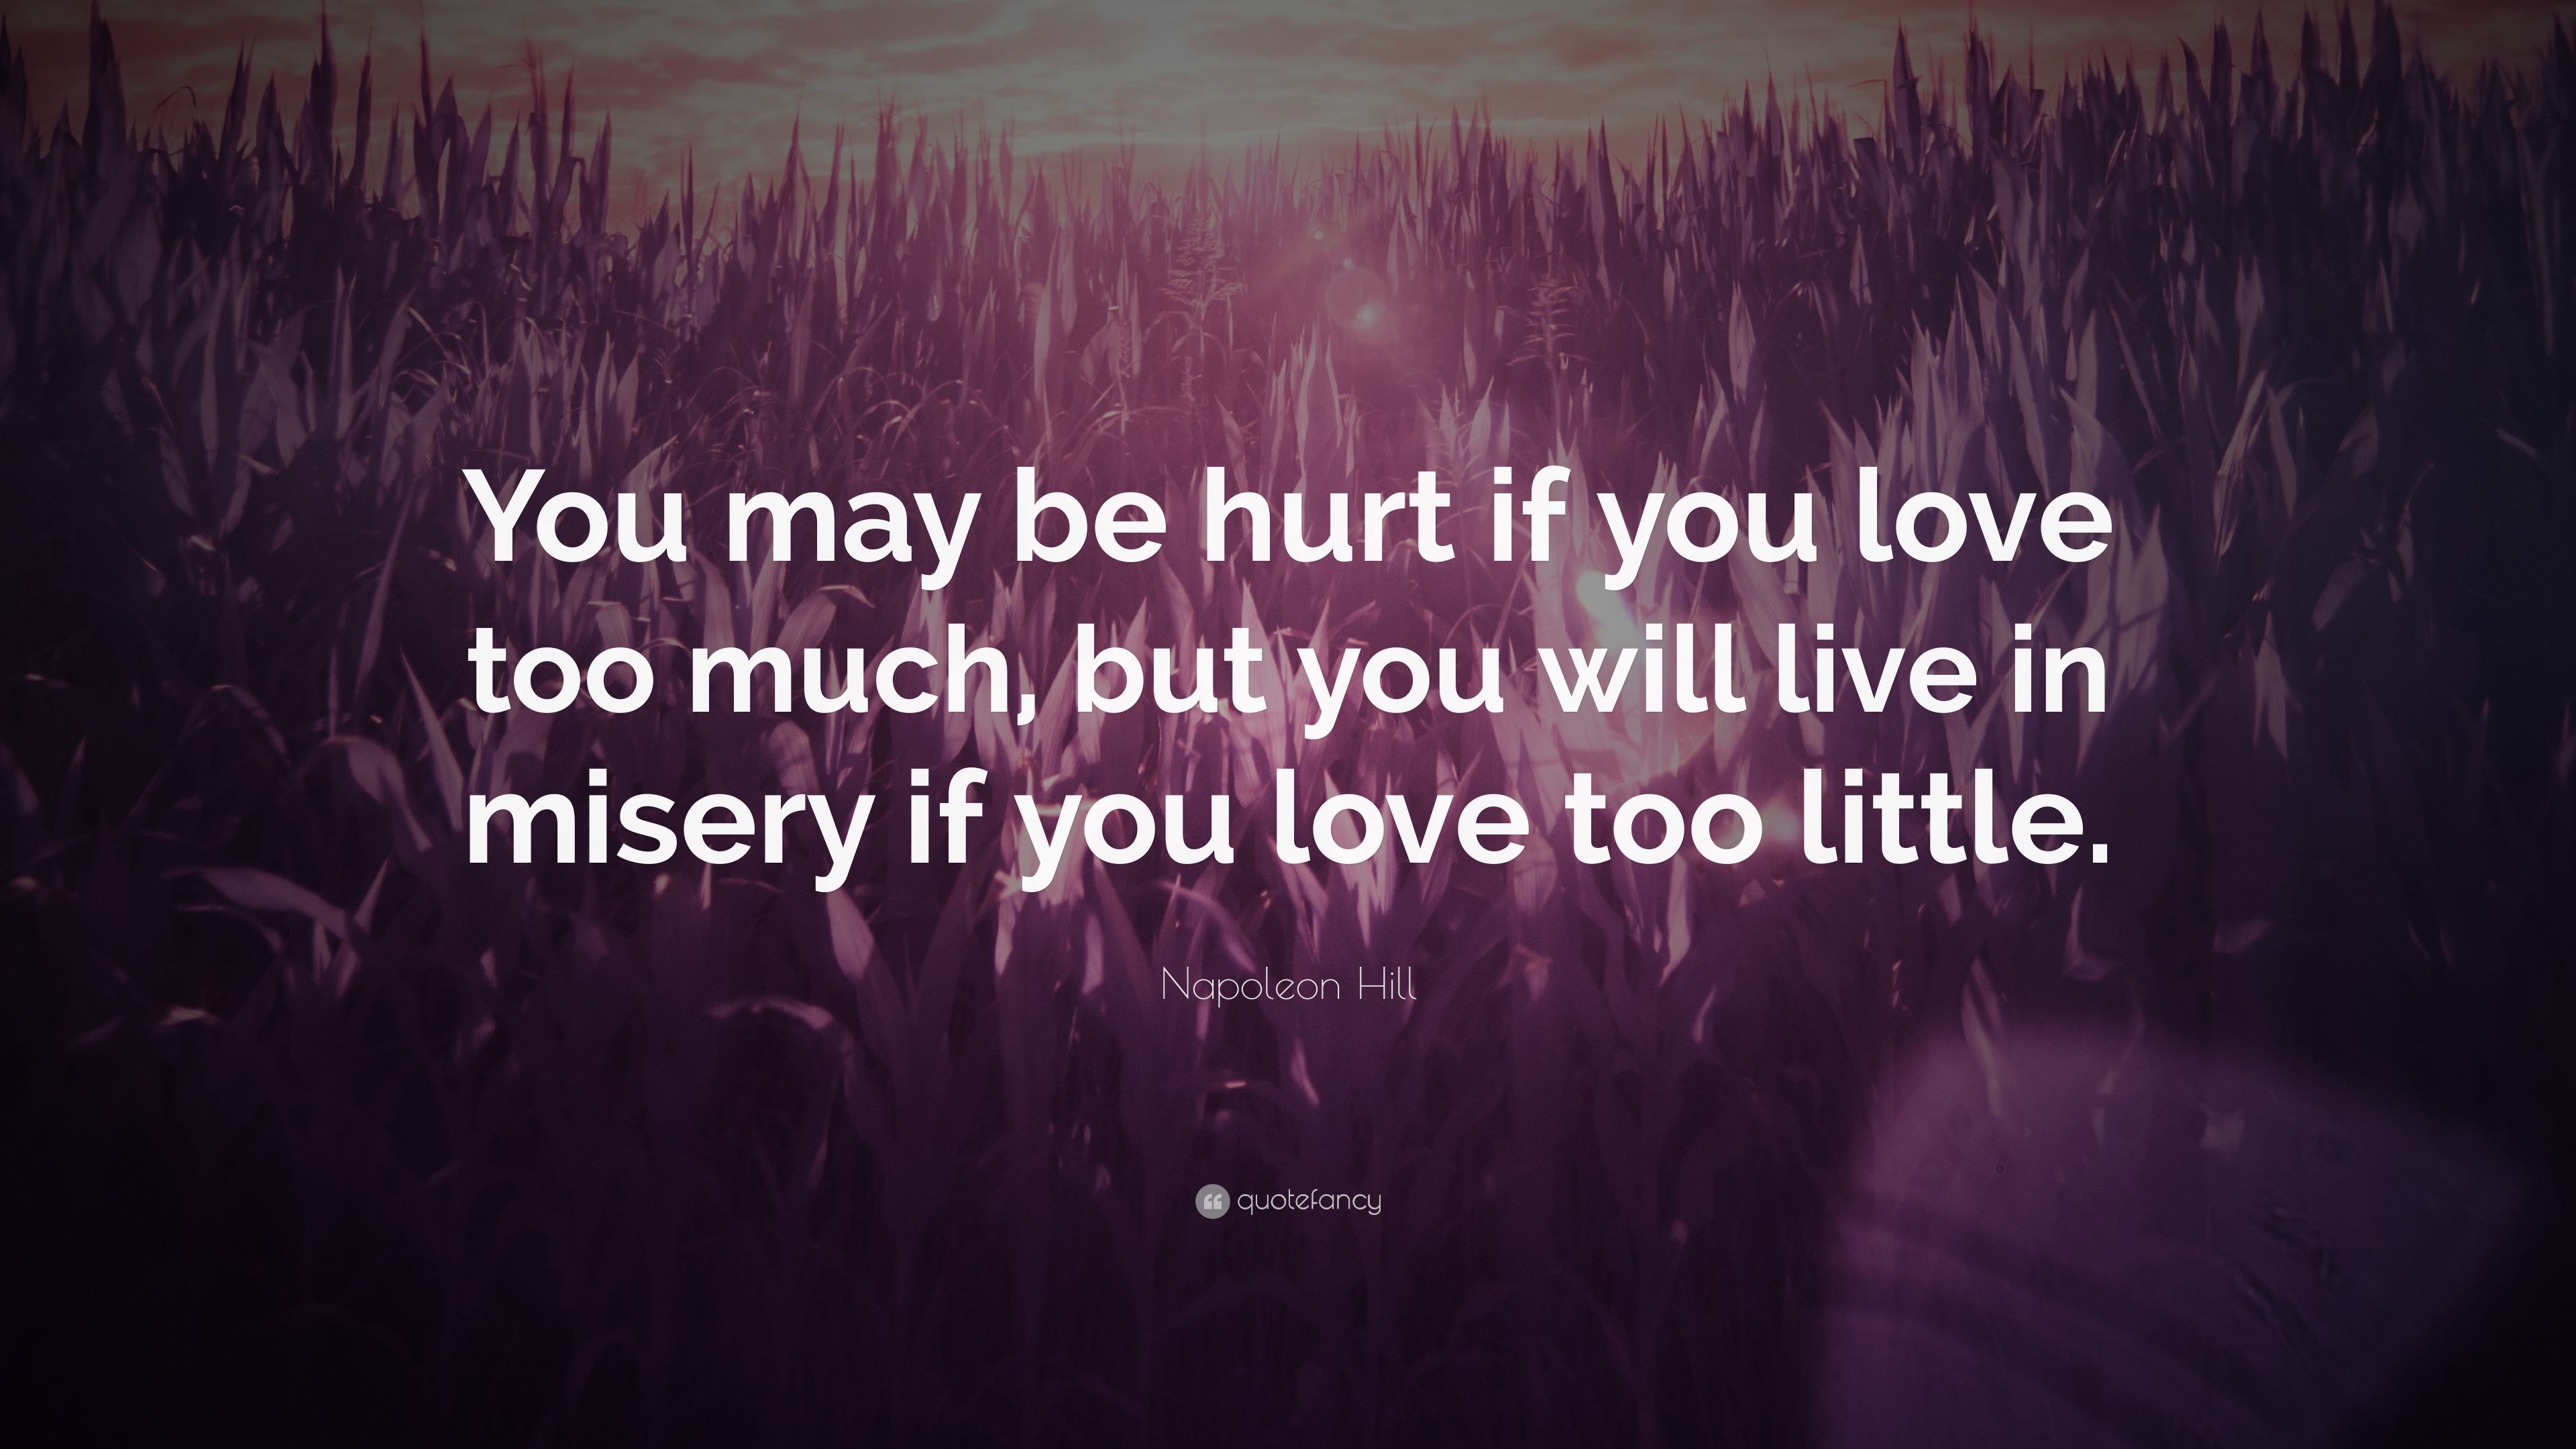 Napoleon Hill Quote “You may be hurt if you love too much but